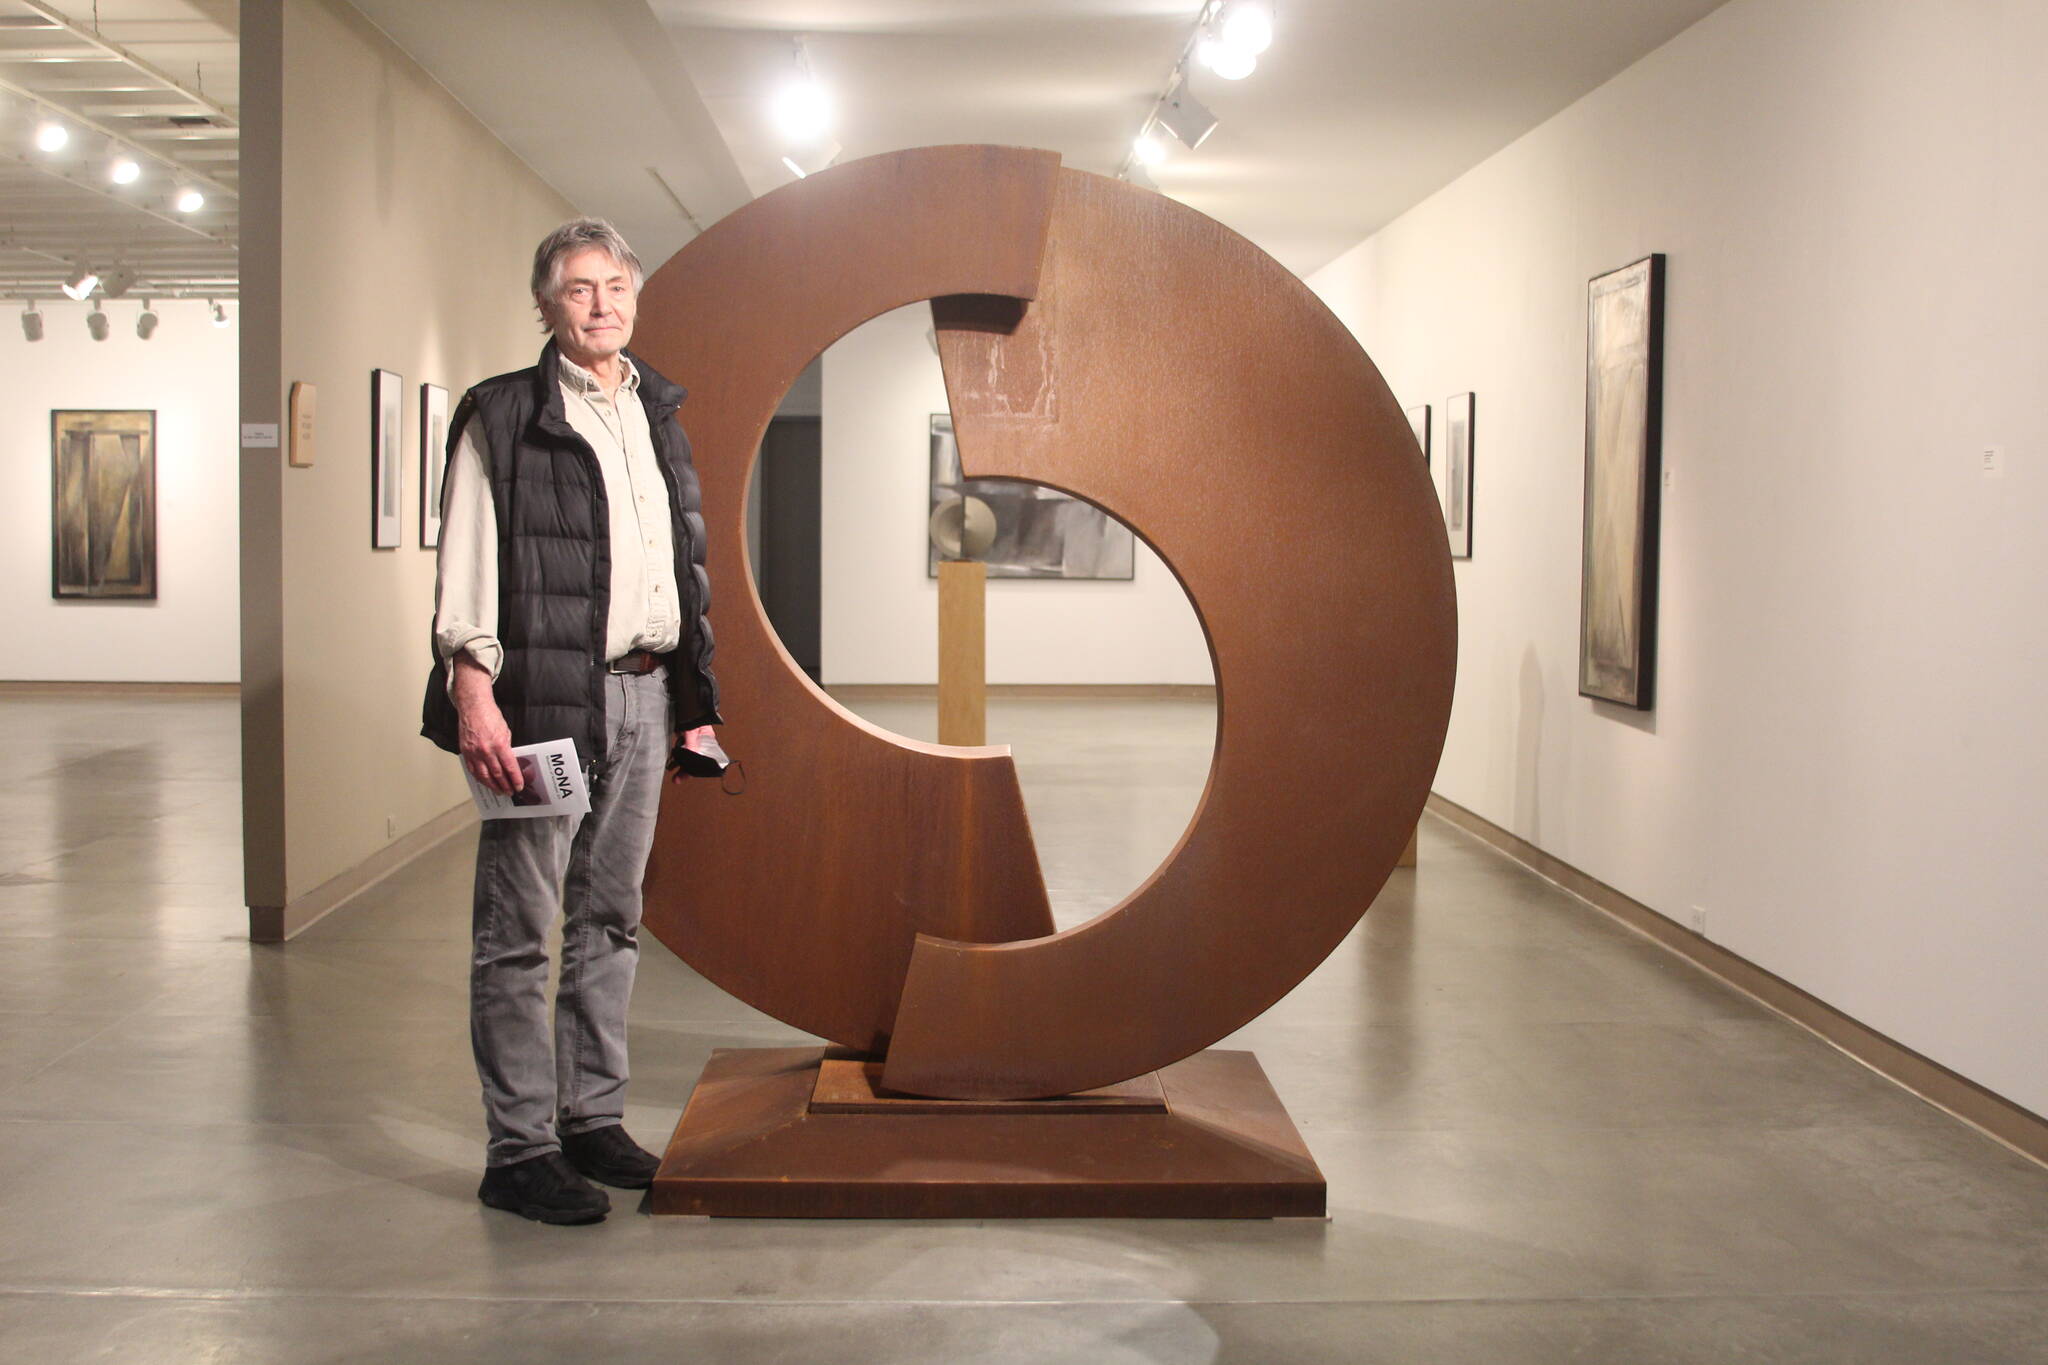 Photo by Karina Andrew/Whidbey News-Times
Richard Nash stands in his exhibit "Consonance" at the Museum of Northwest Art in La Conner.